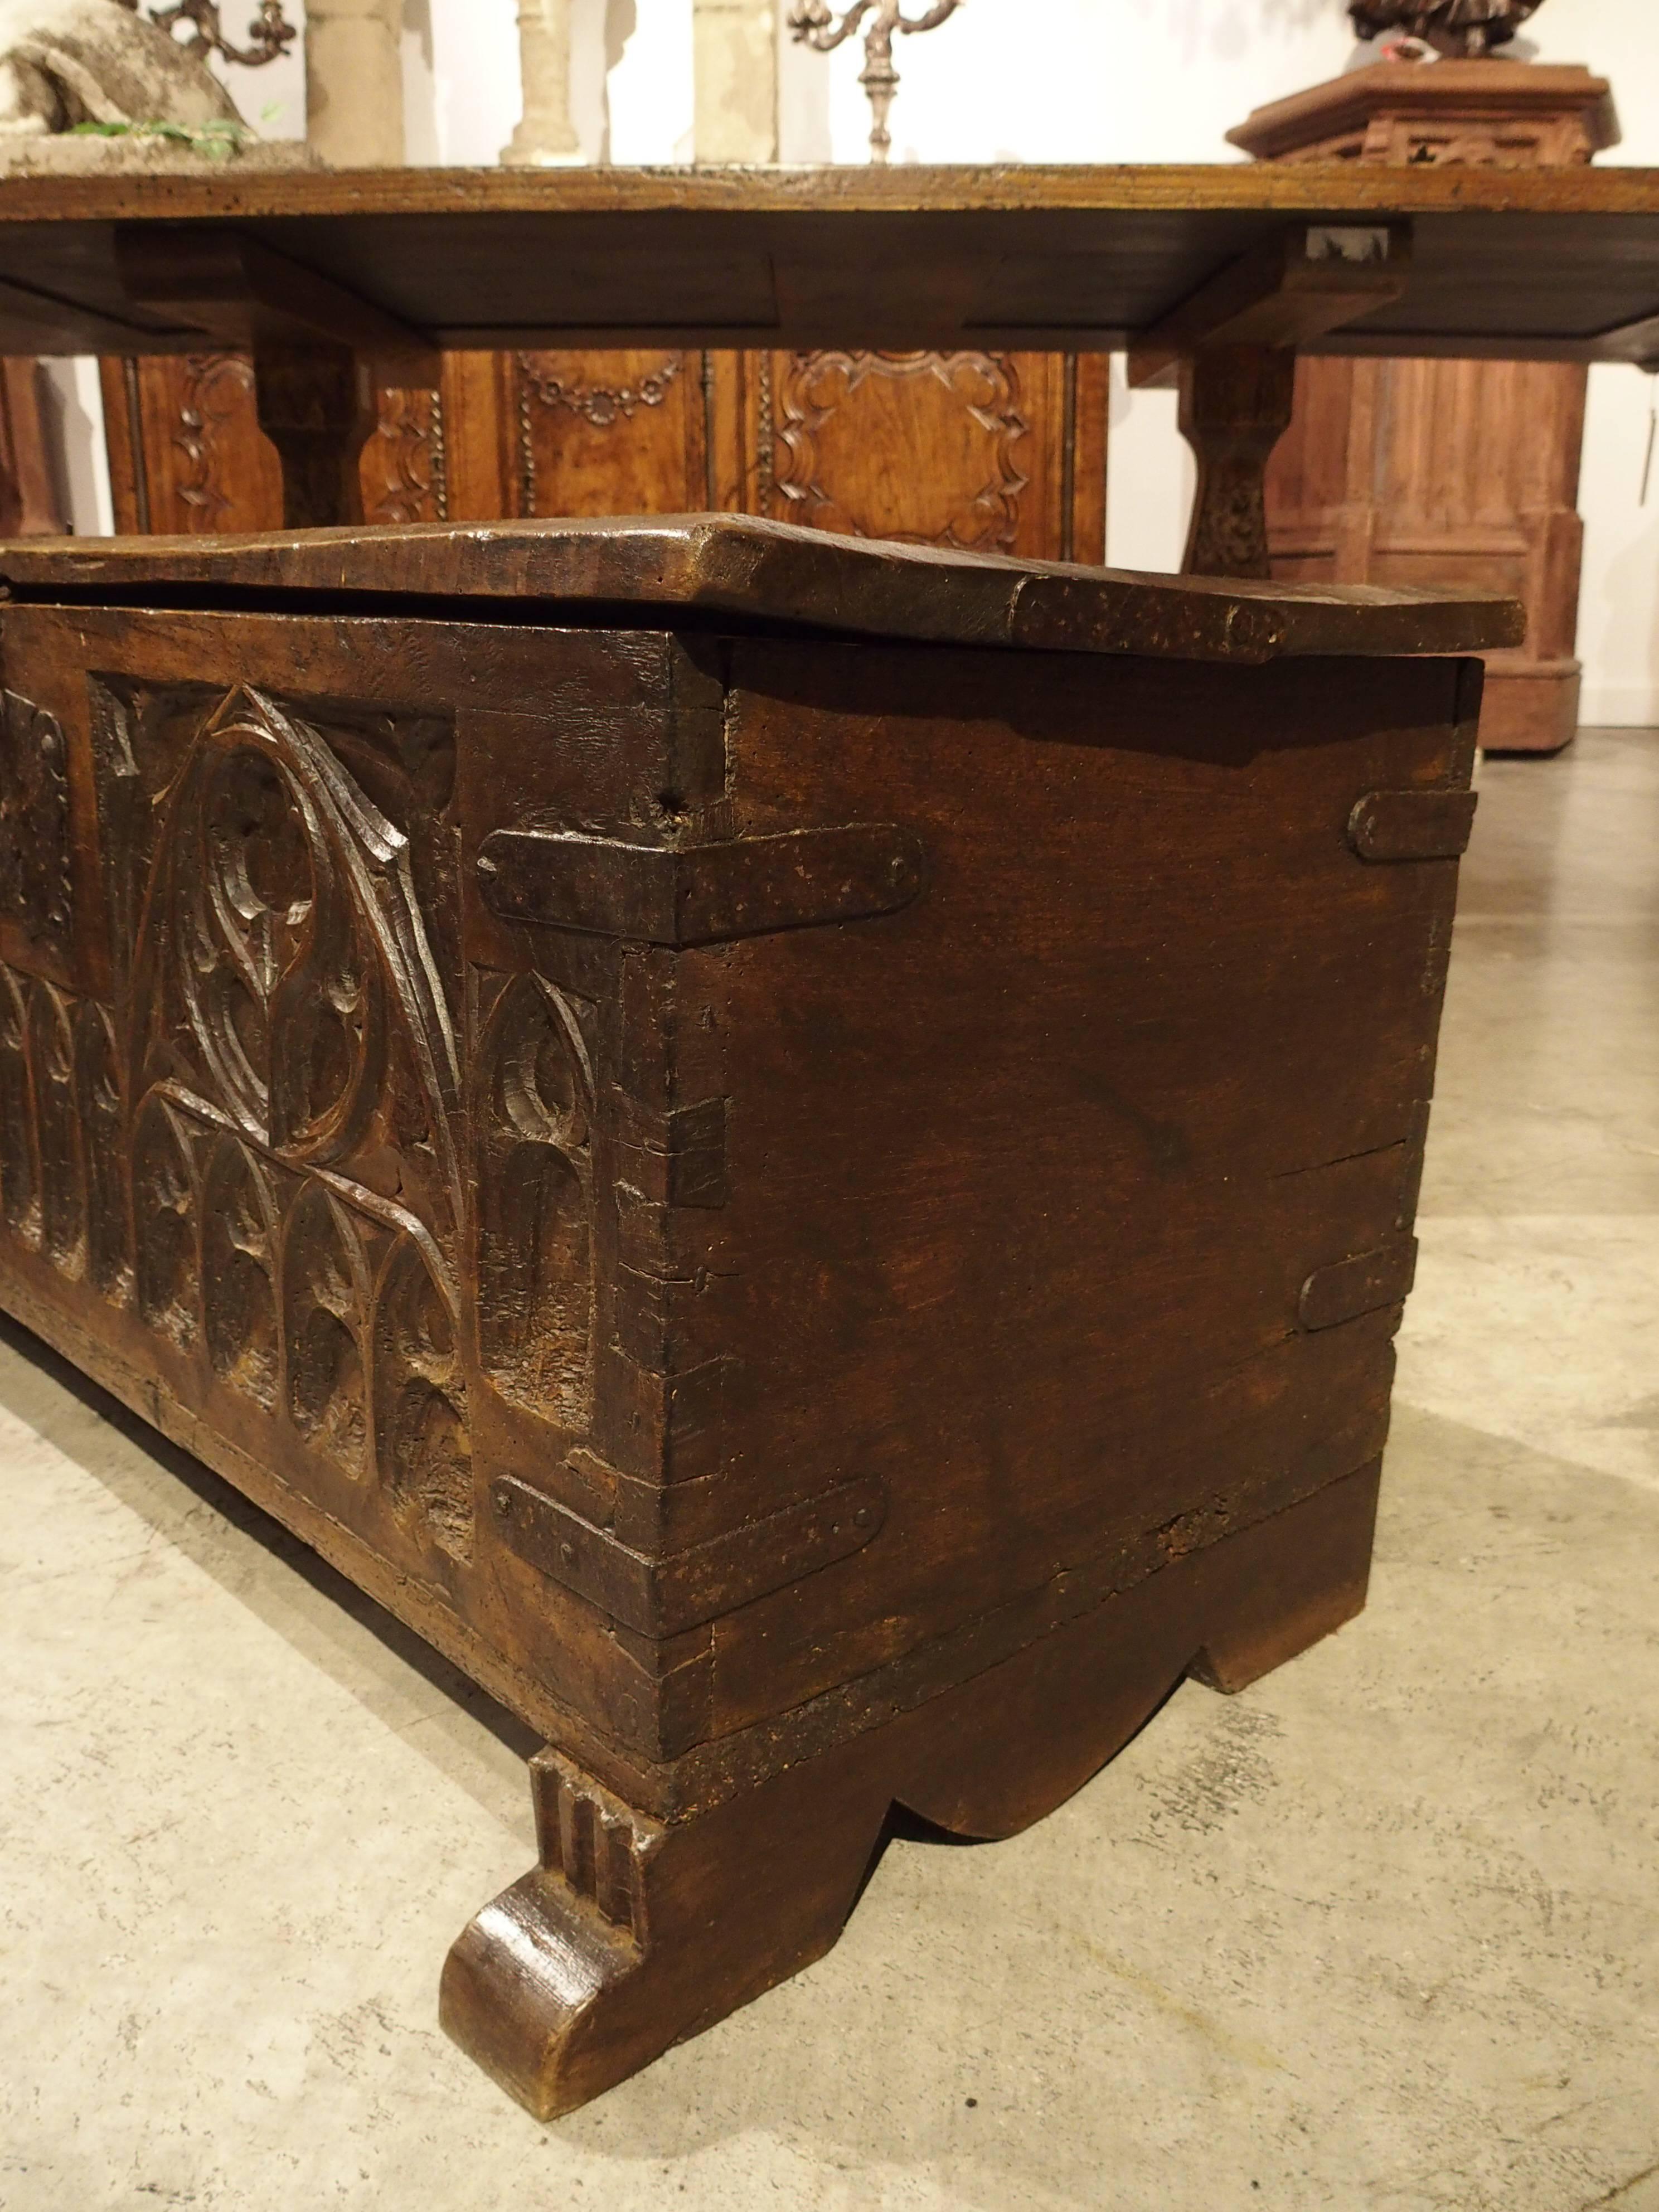 This French Gothic style walnut wood trunk dates to the 1600s. There are motifs of cusps, tracery and arcading on the front. The sides and backs are plain and the feet are shaped platforms with triglyph motifs on the front. It has its original iron